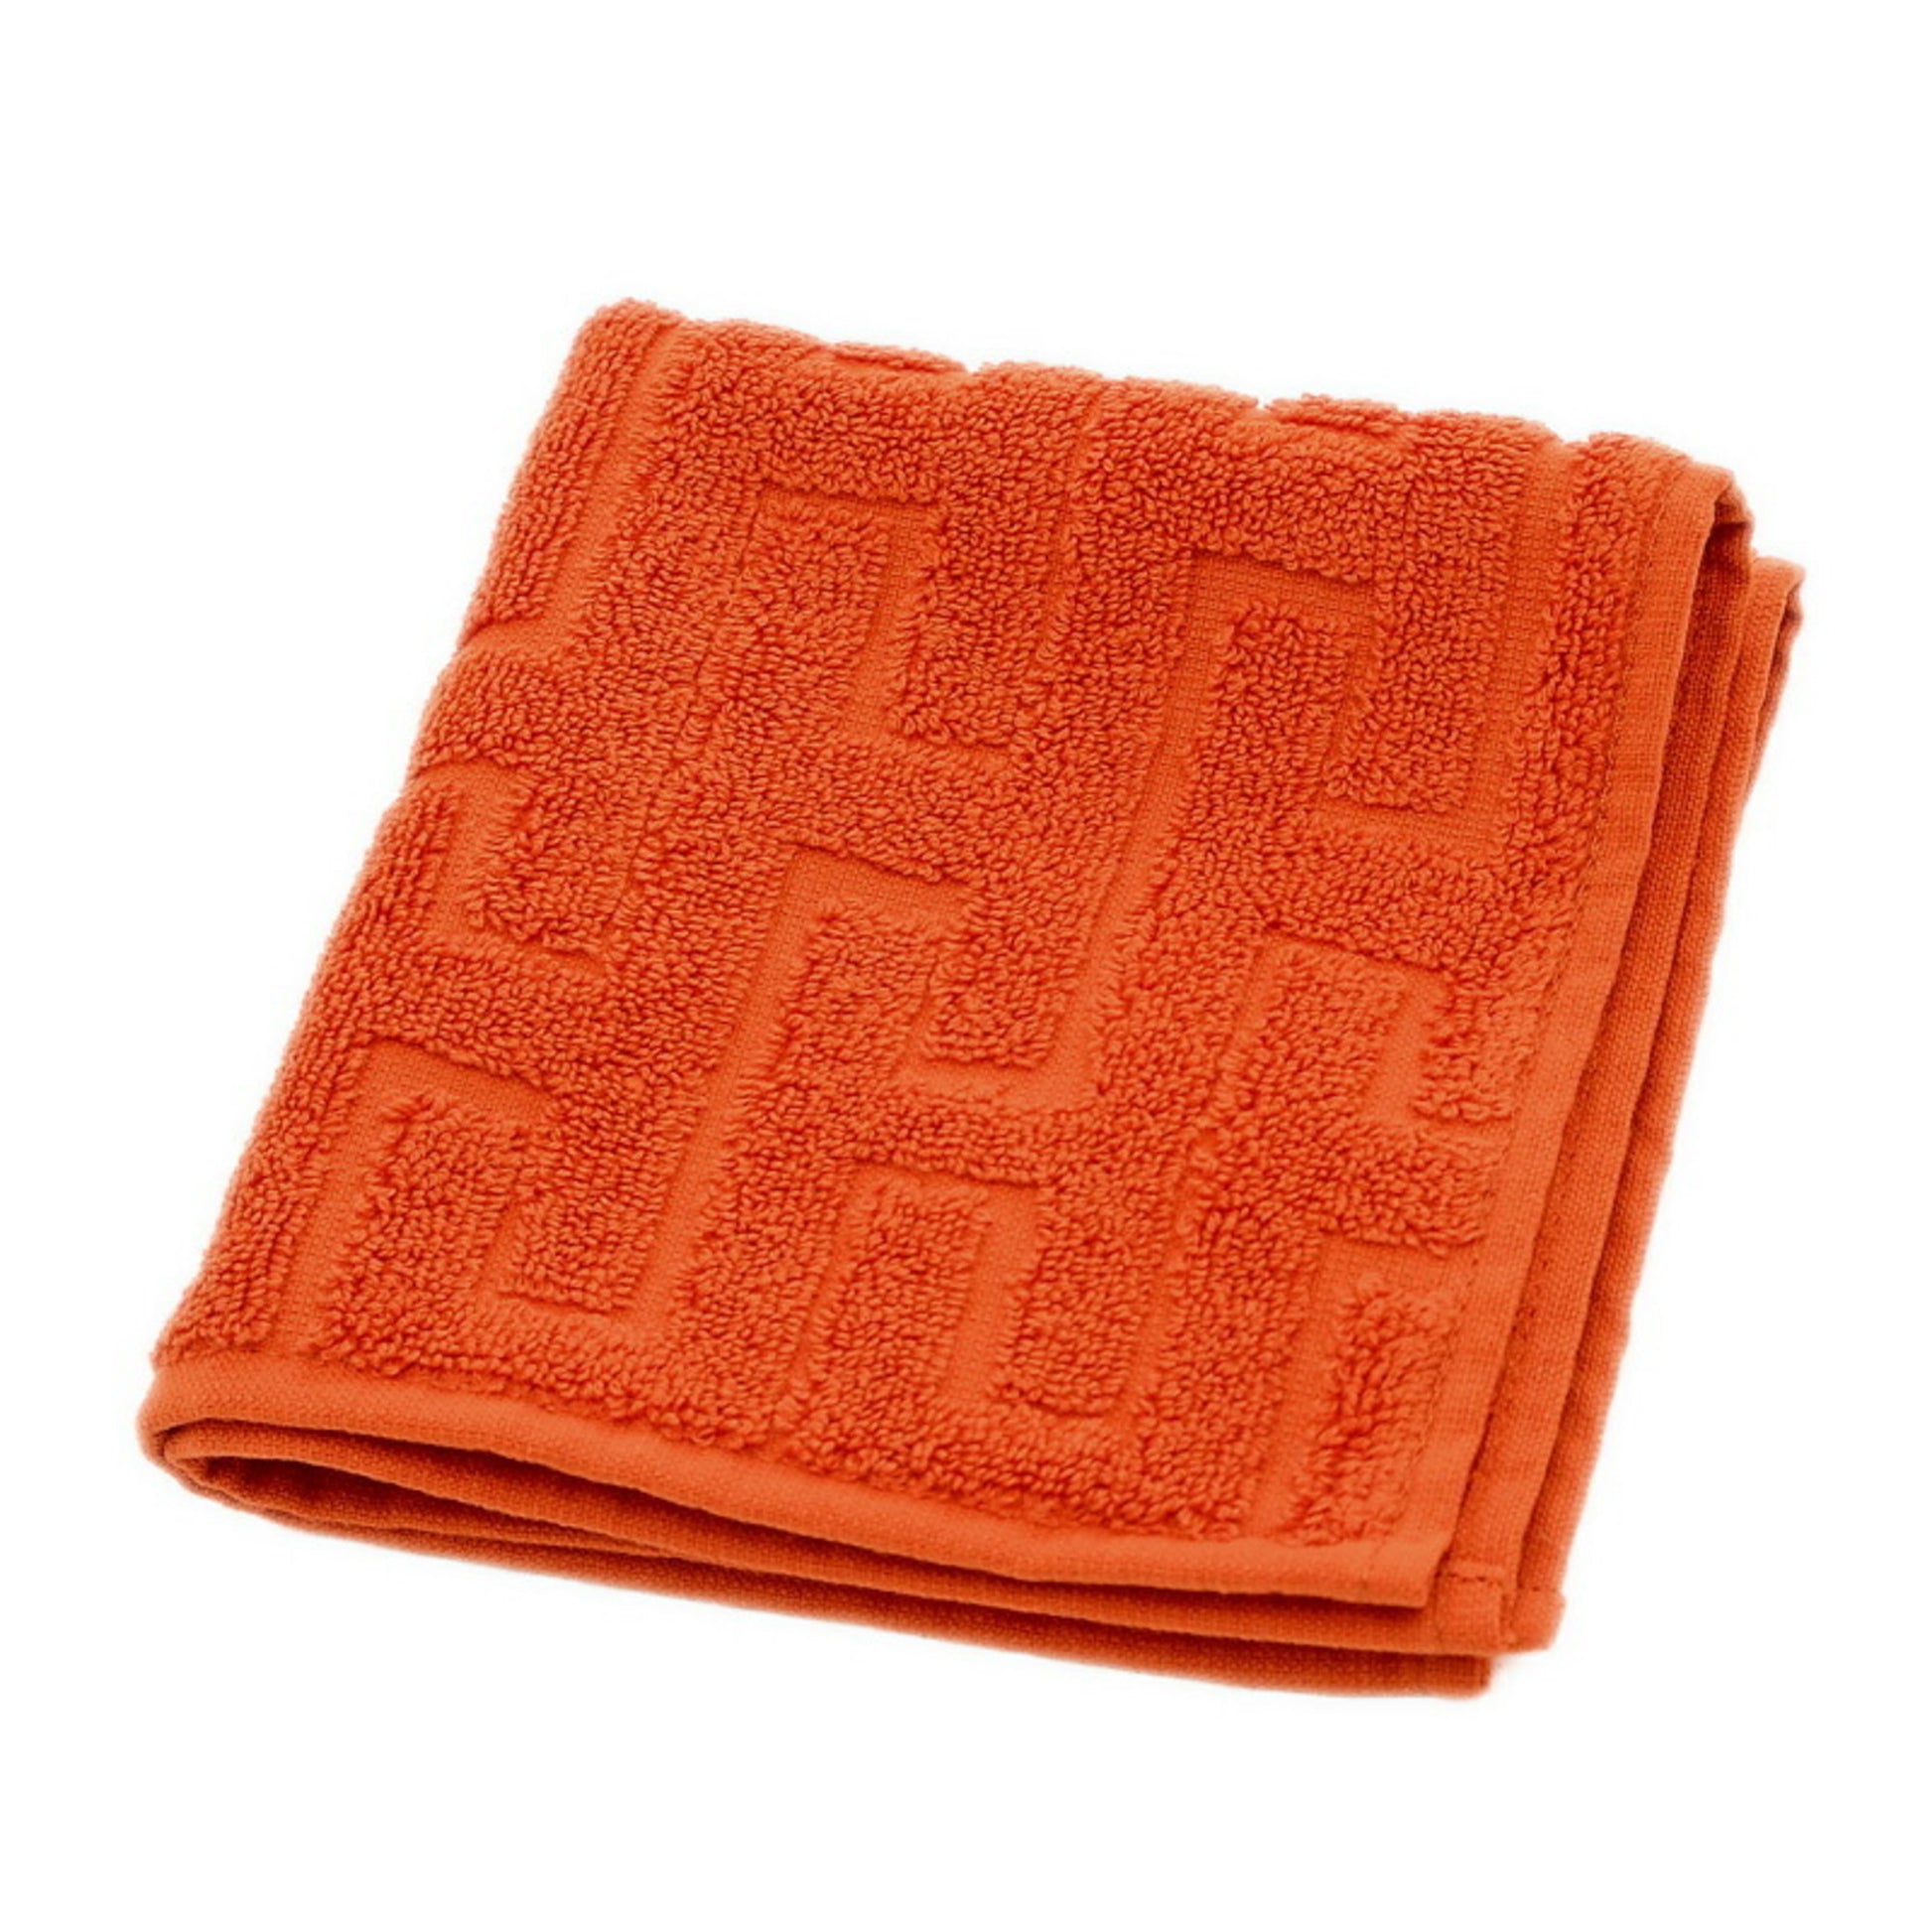 Stairs hand towel